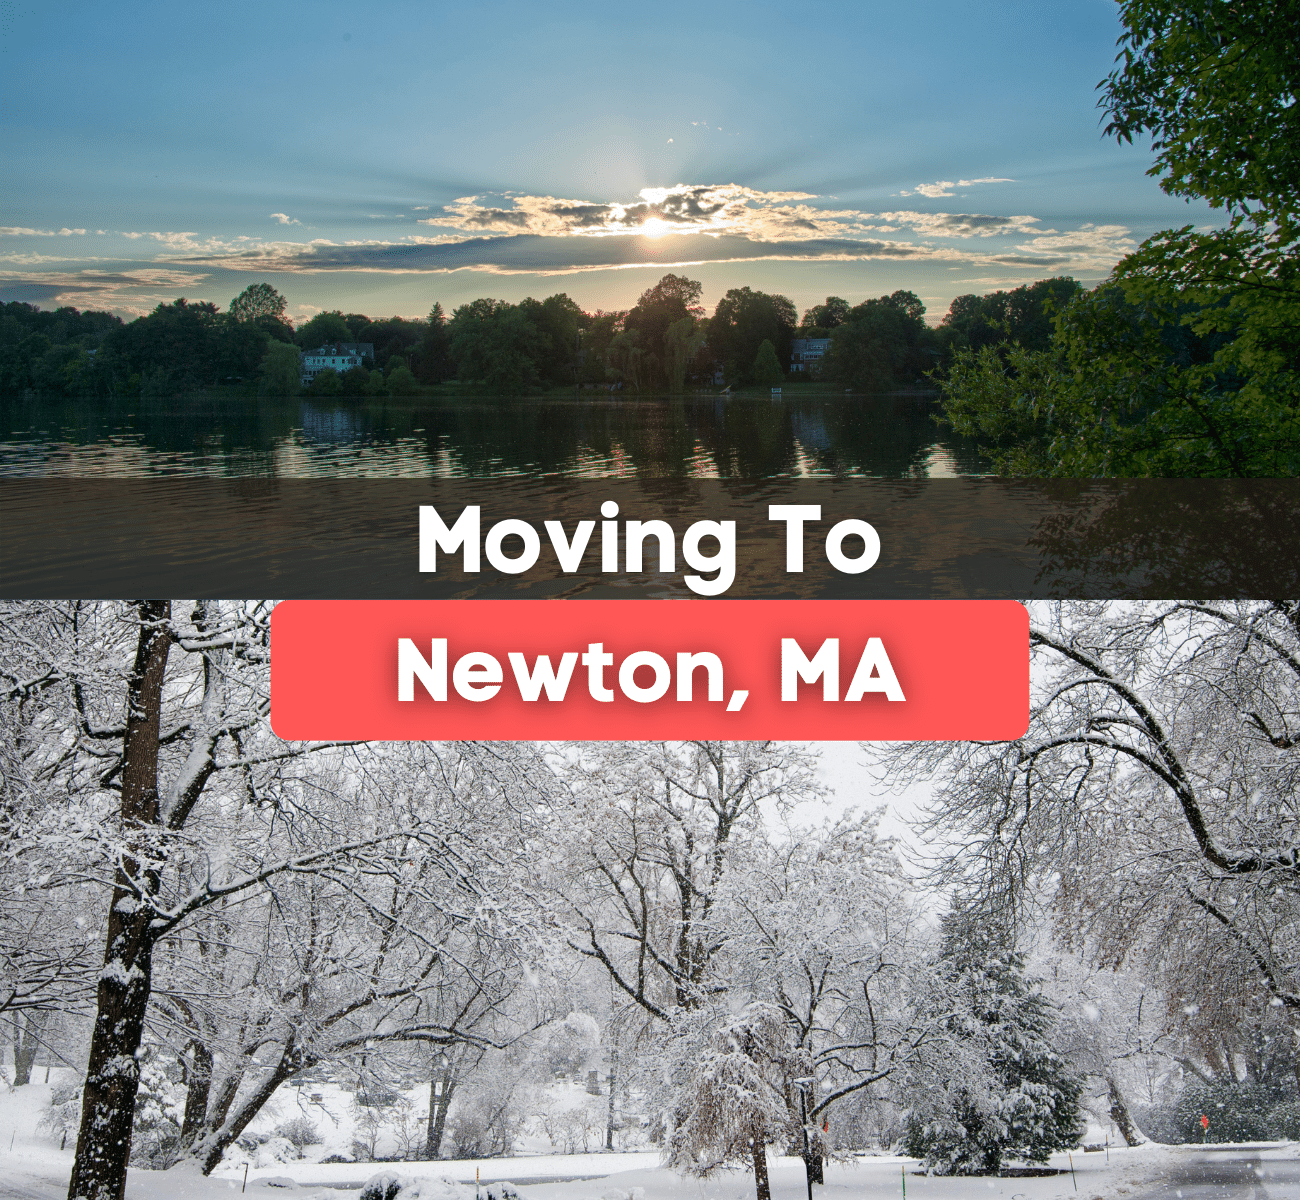 moving to Newton, MA - snowstorm in Newton and Crystal Lake 